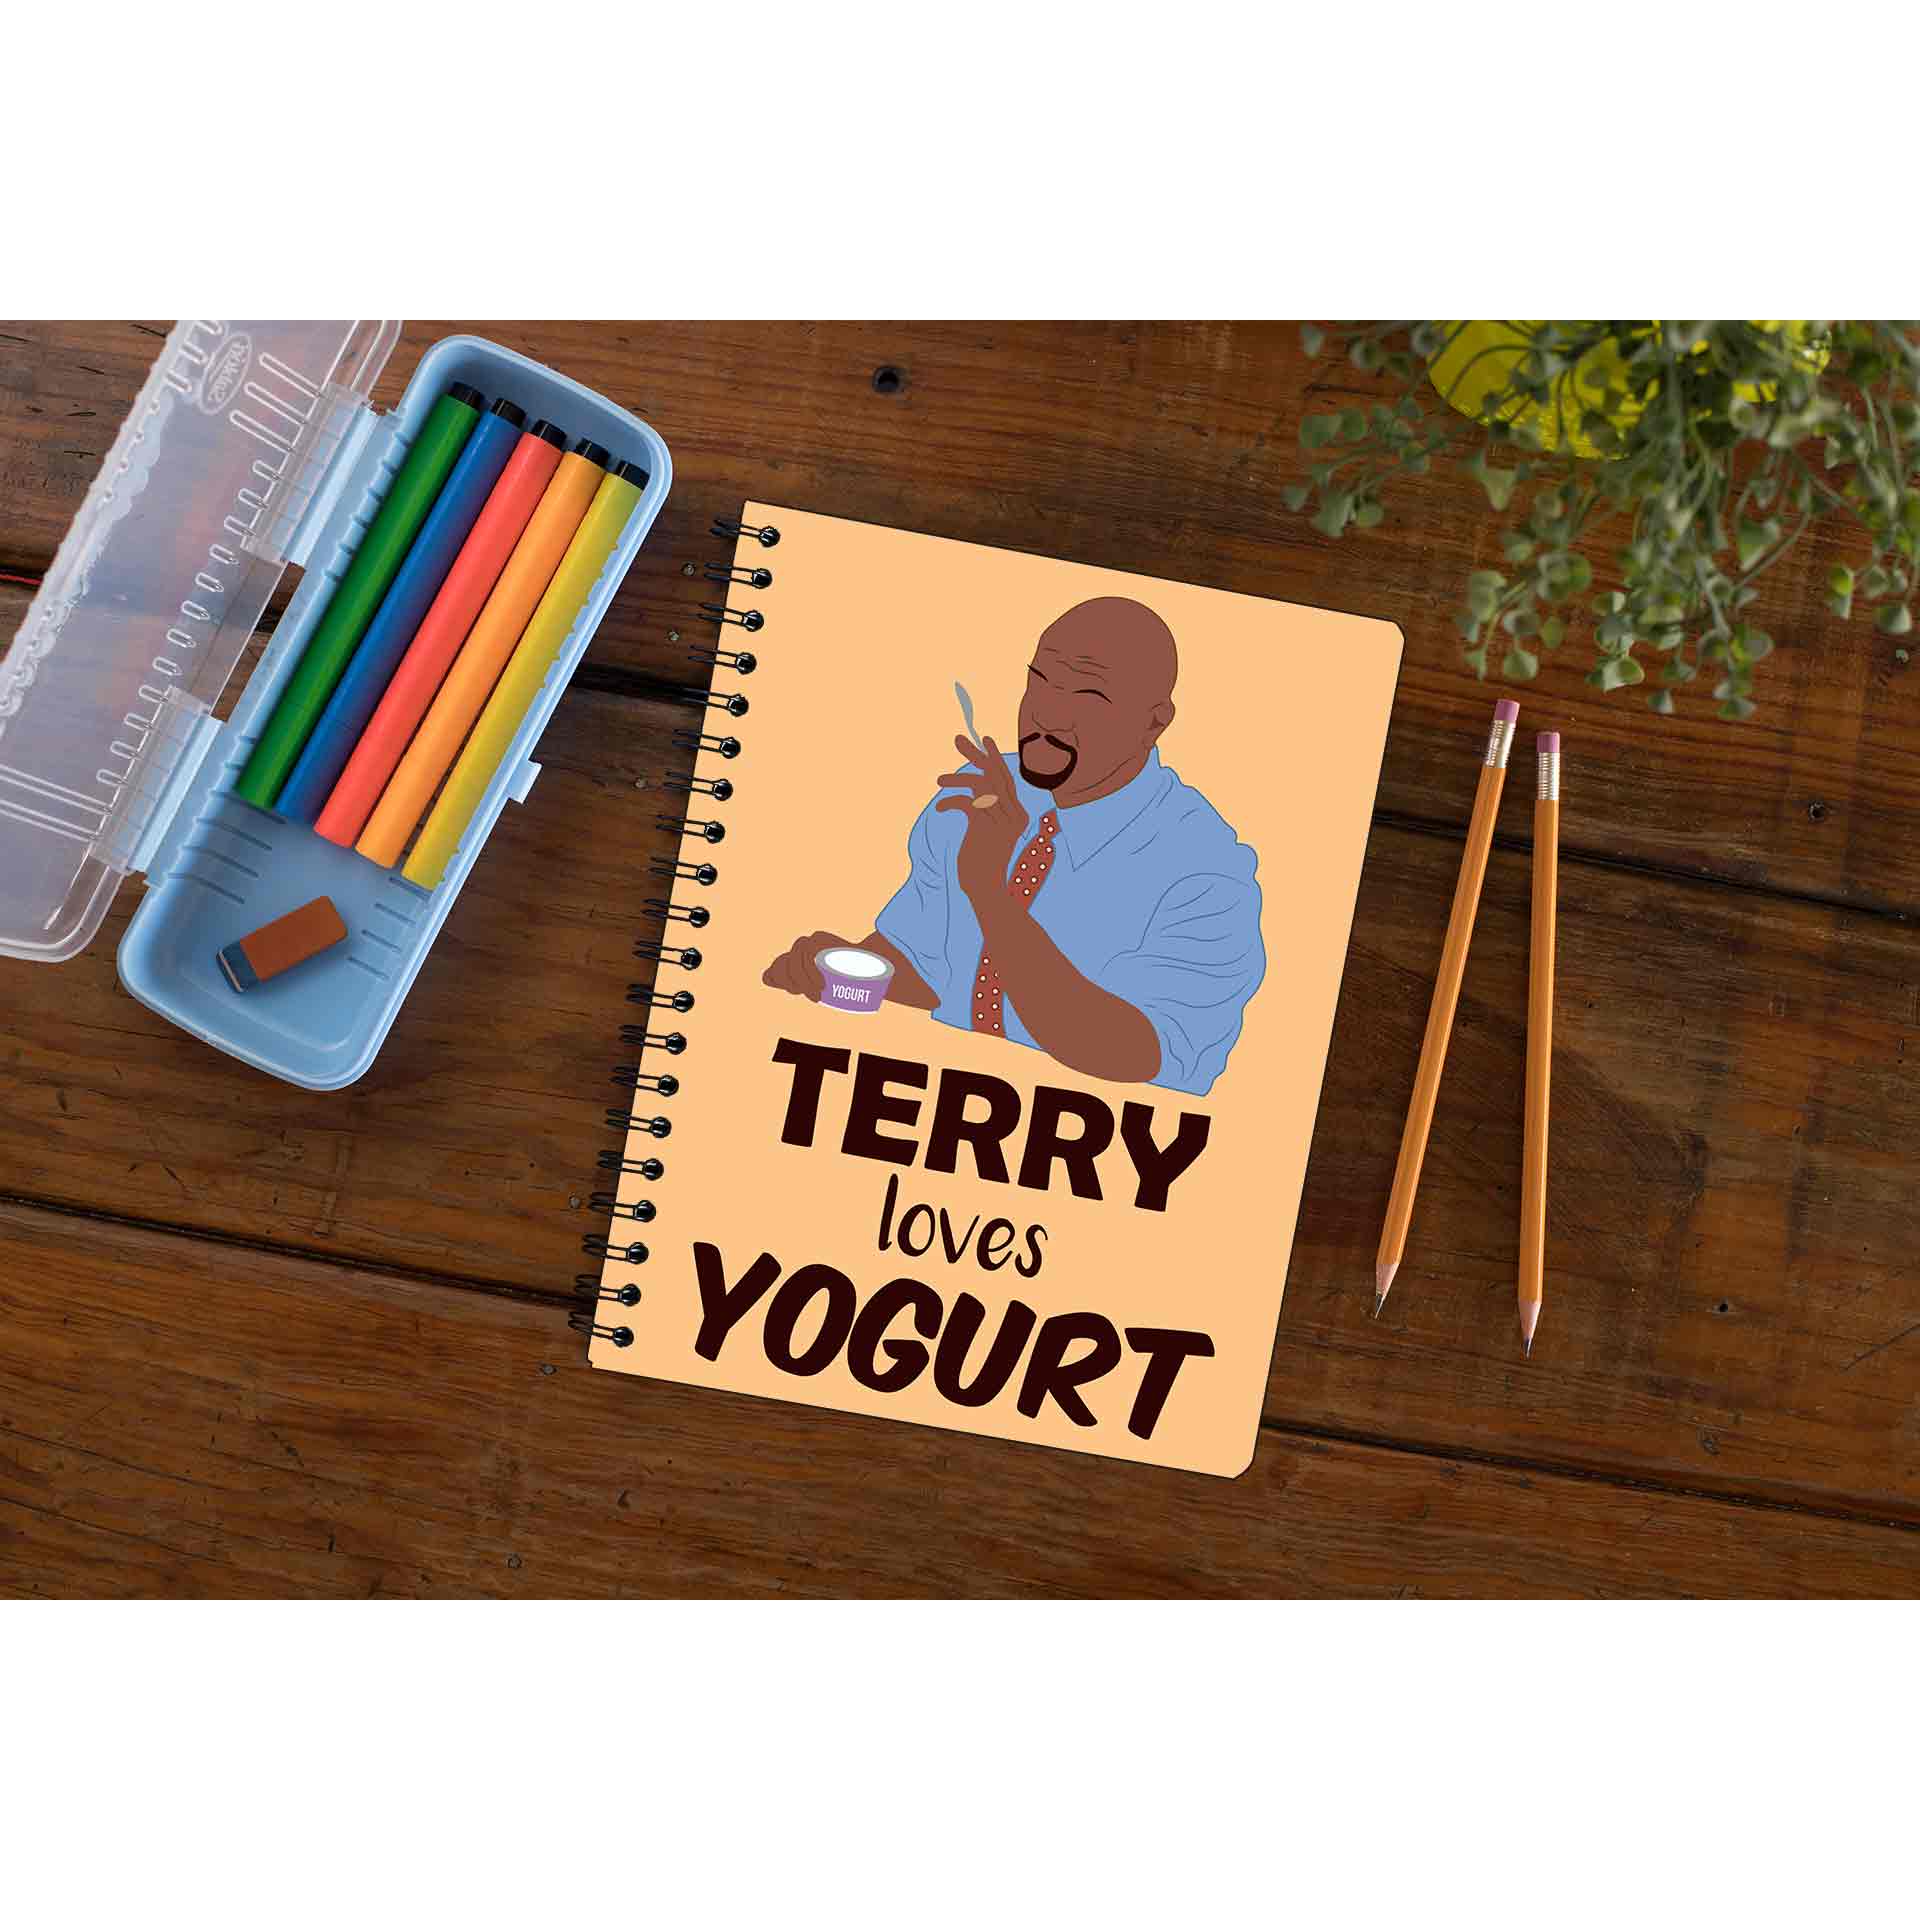 brooklyn nine-nine terry loves yogurt notebook notepad diary buy online india the banyan tee tbt unruled detective jake peralta terry charles boyle gina linetti andy samberg merchandise clothing acceessories